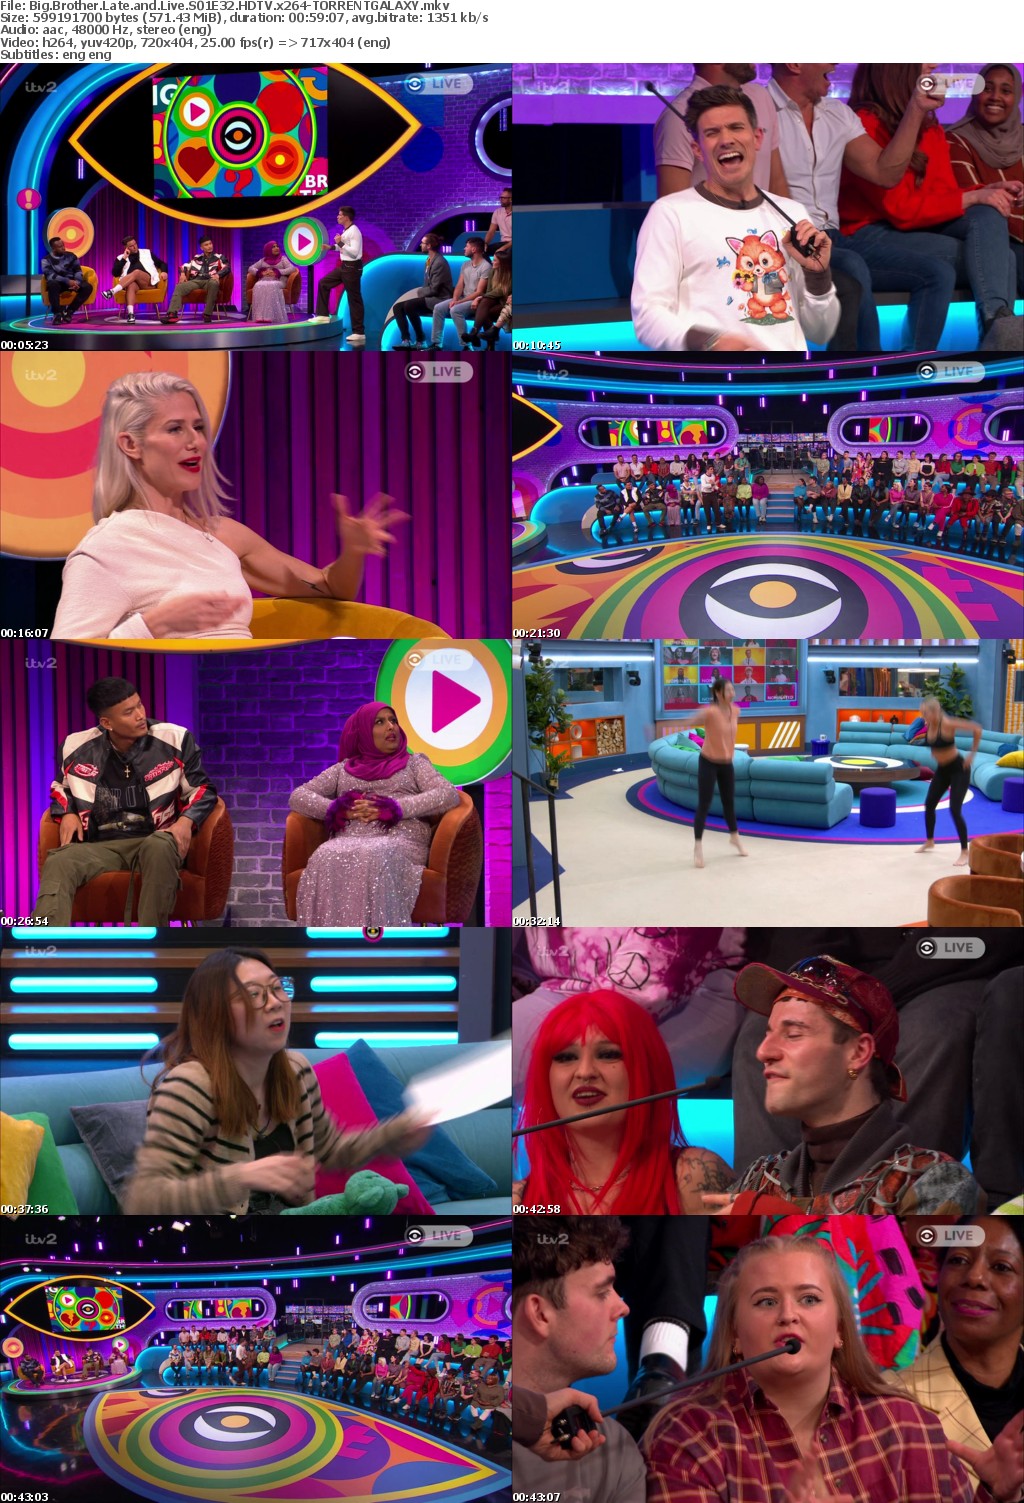 Big Brother Late and Live S01E32 HDTV x264-GALAXY